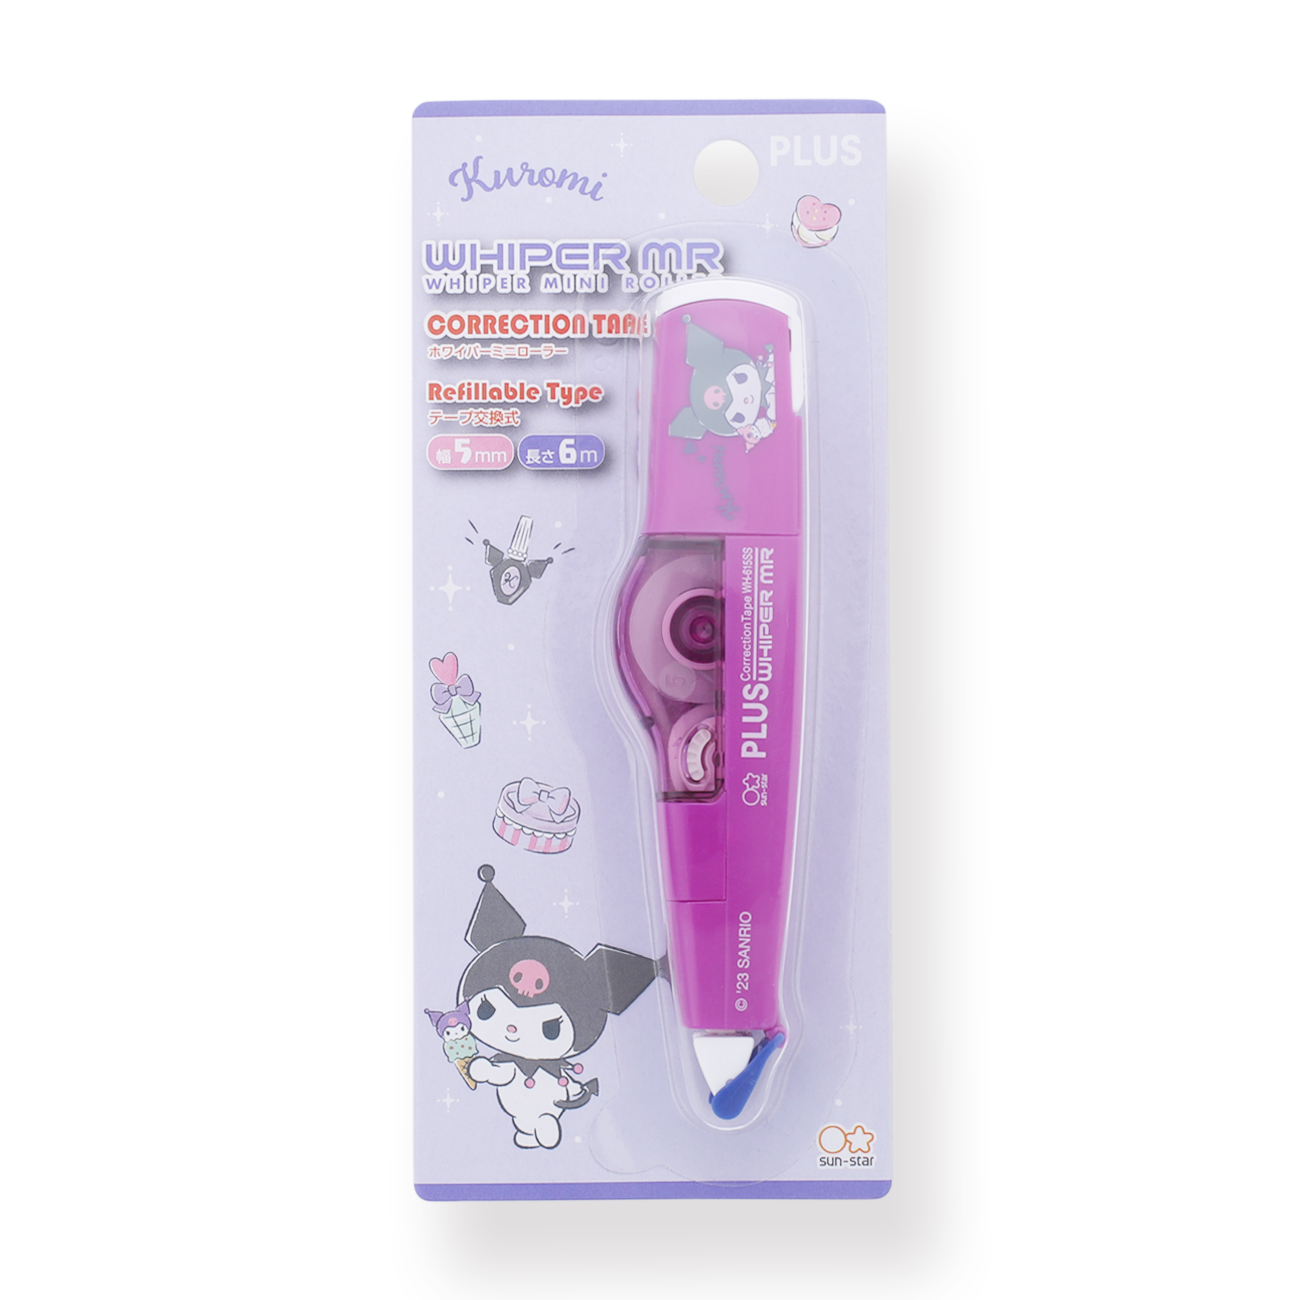 Plus Whiper MR Limited Edition Correction Tape - Kuromi — Stationery Pal